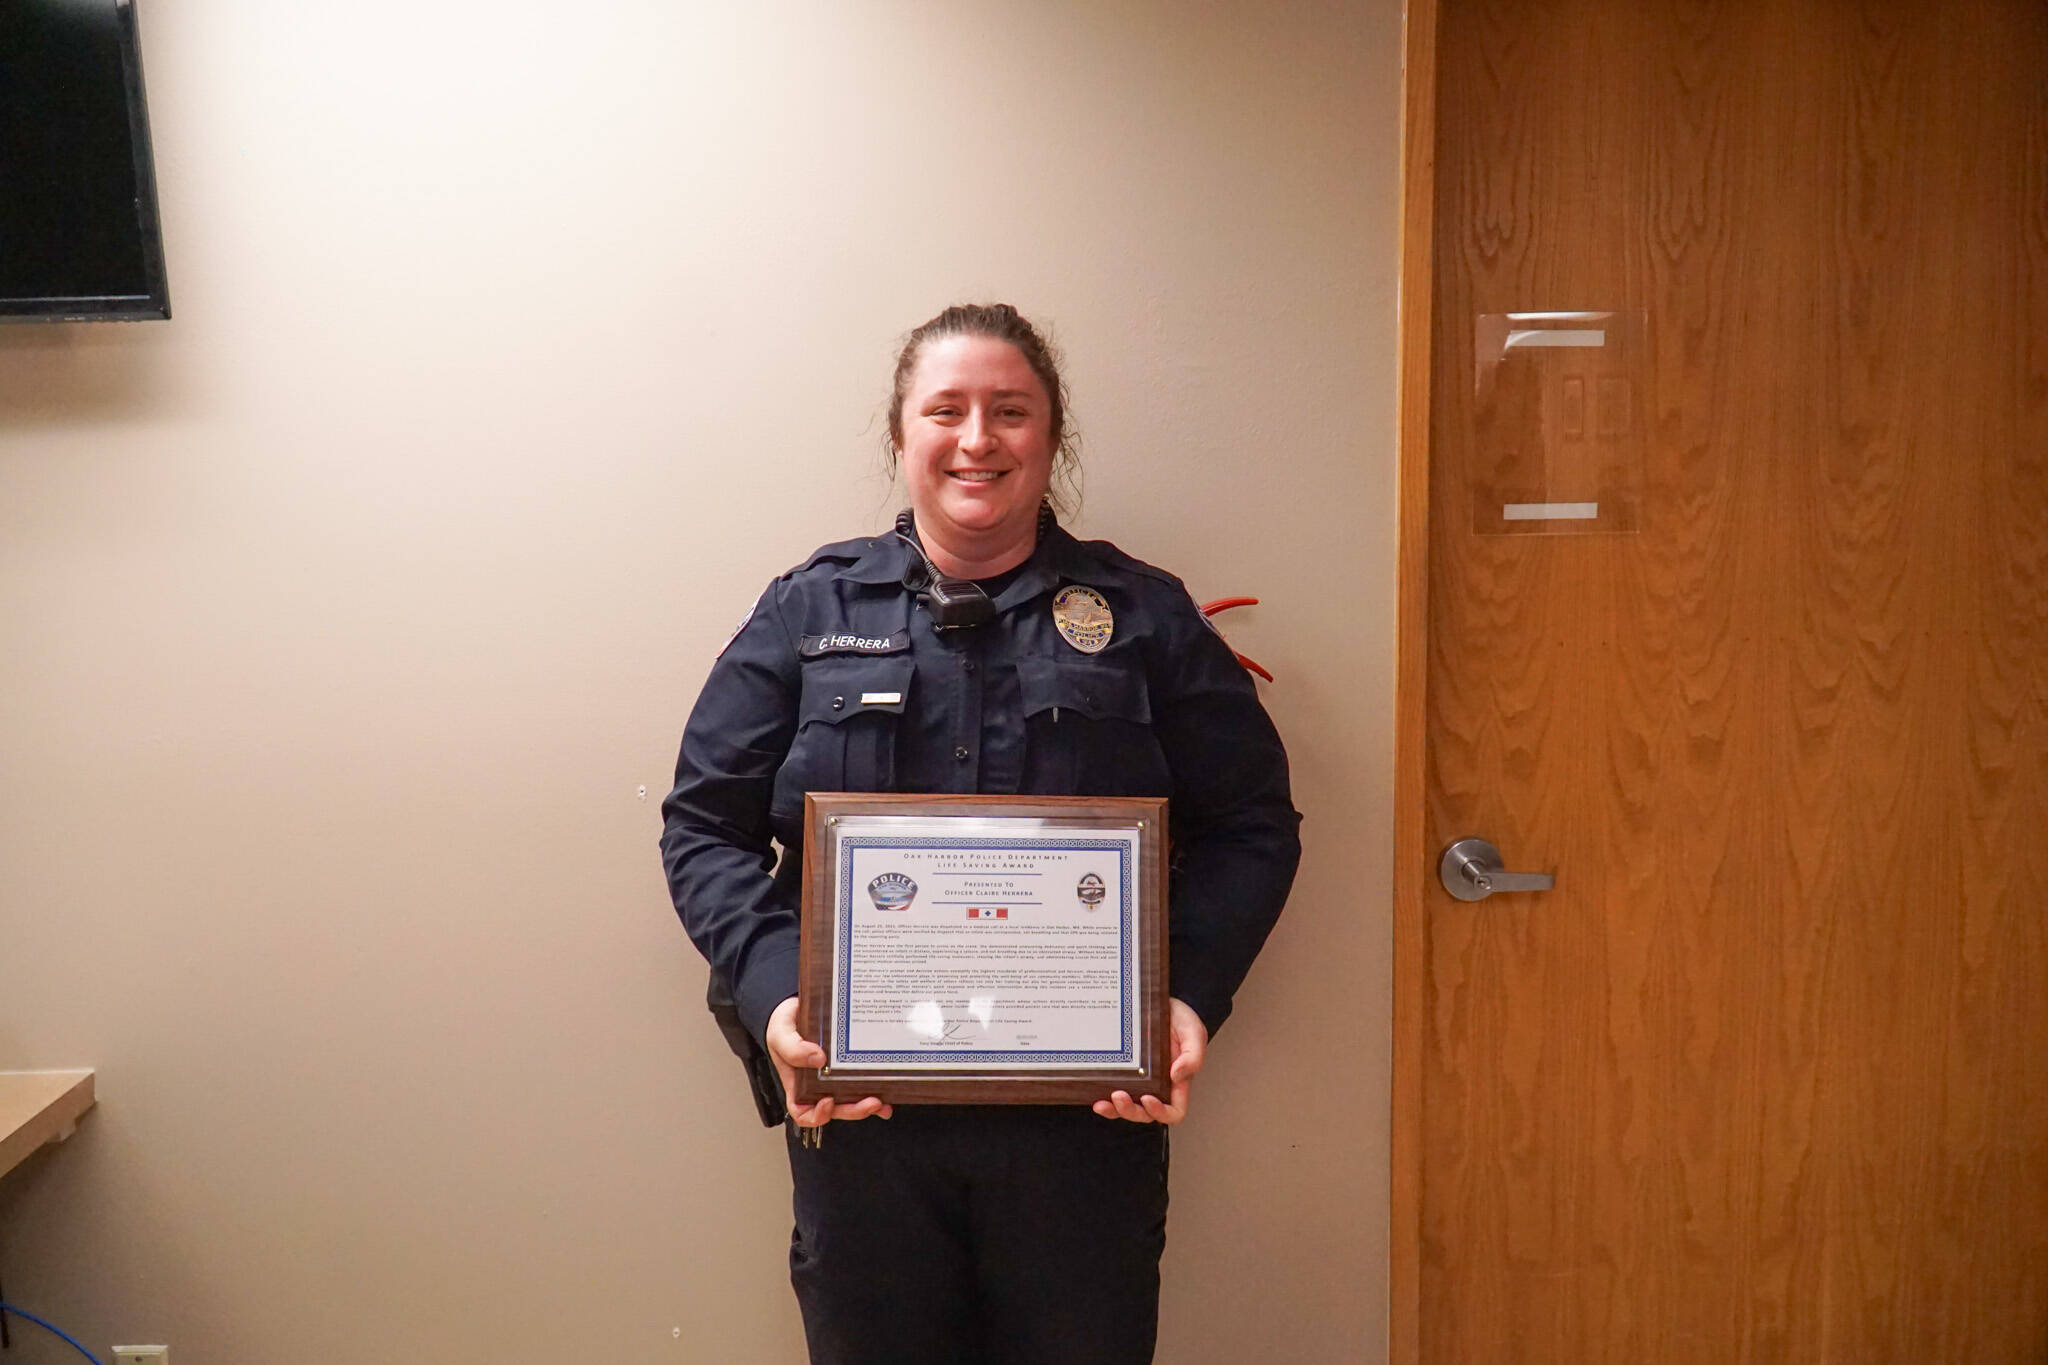 Officer Claire Herrera displays the life saving award, which she received on Monday from the Oak Harbor Police Department. (Photo by Sam Fletcher)